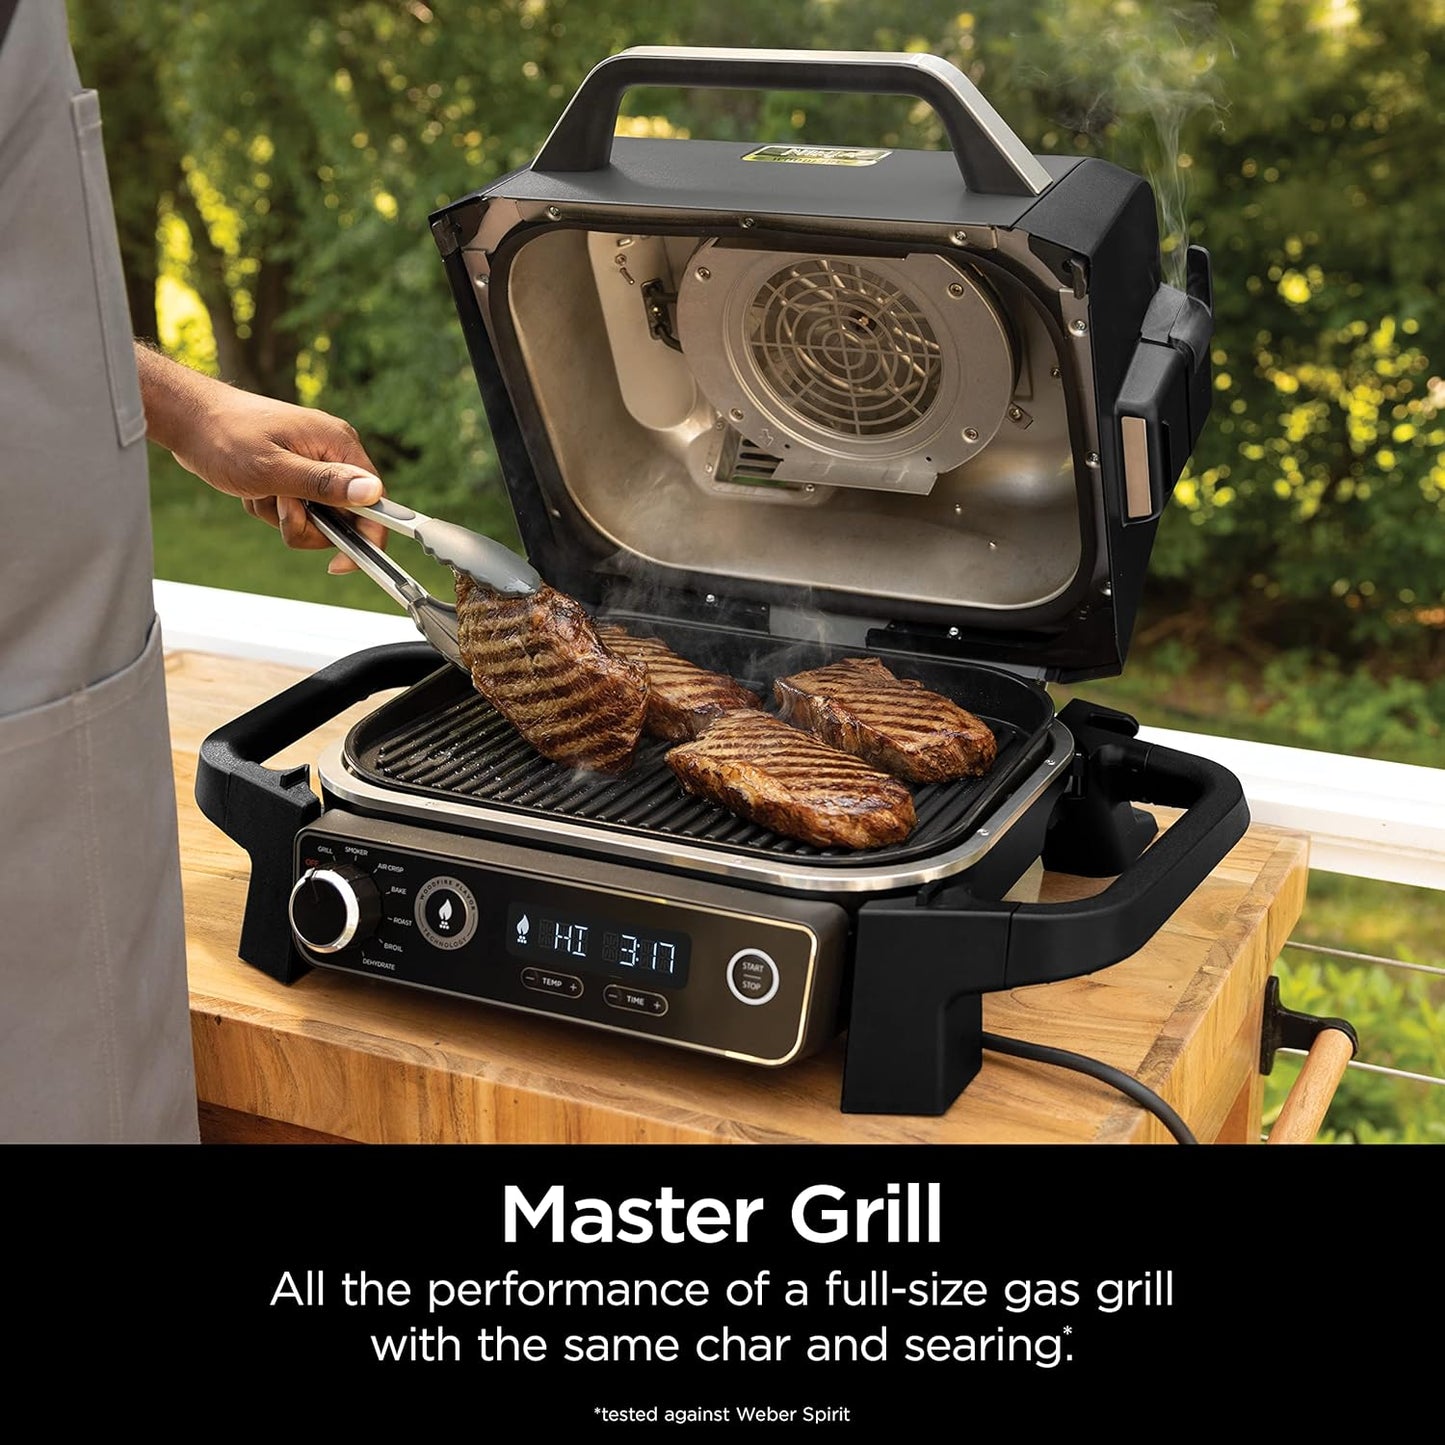 Woodfire Pro 7-In-1 Grill & Smoker with Thermometer, Air Fryer, BBQ, Bake, Roast, Broil - Portable Electric Outdoor Grill, Grey